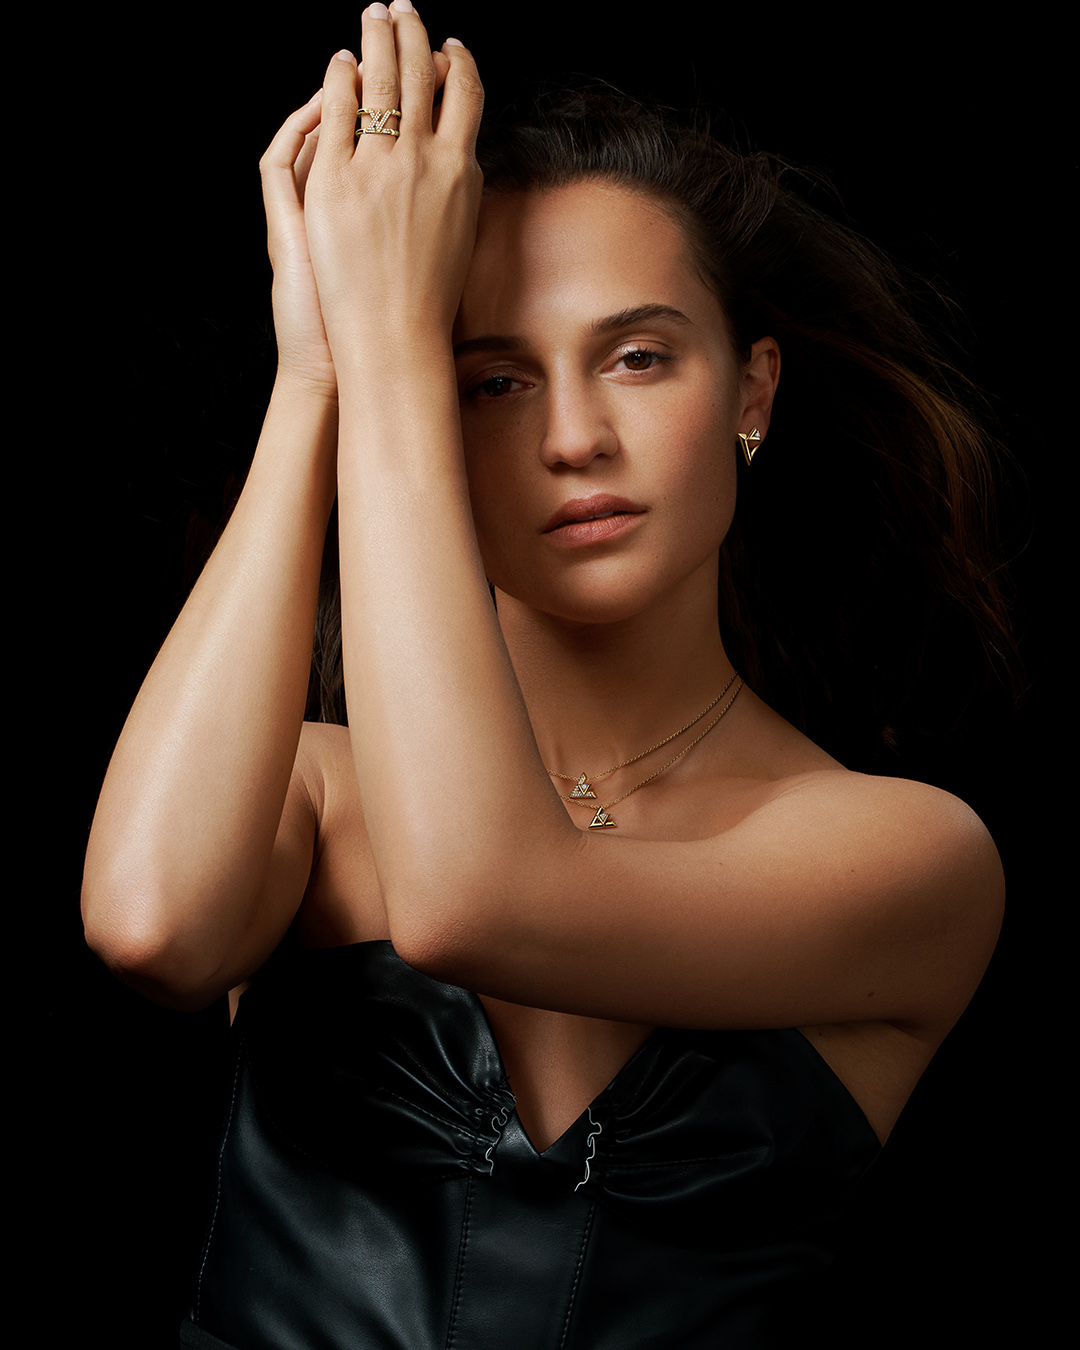 Louis Vuitton on X: #AliciaVikander for #LVVolt. Embodying the line's  dynamic and modern spirit, the actress showcases pieces from #LouisVuitton's  Fine Jewelry Collection by Francesca Amfitheatrof. Discover the full line  including the